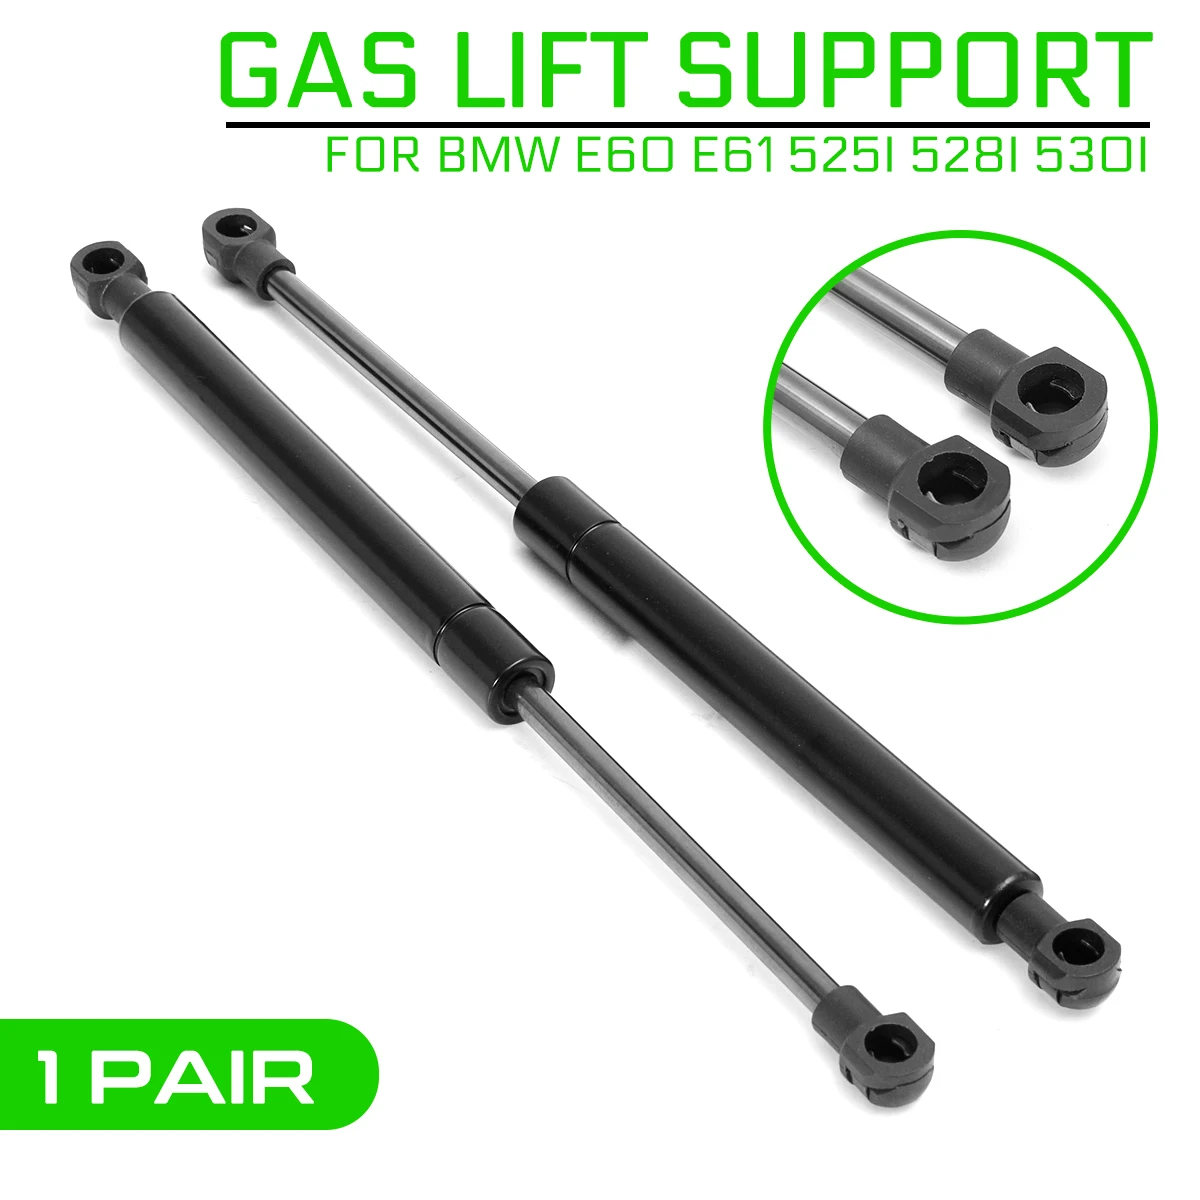 

2pcs Car Support Rod Front Hood Gas Lift Support Shock Strut Damper Car Accessories Replacement for BMW E60 E61 525i 528i 530i